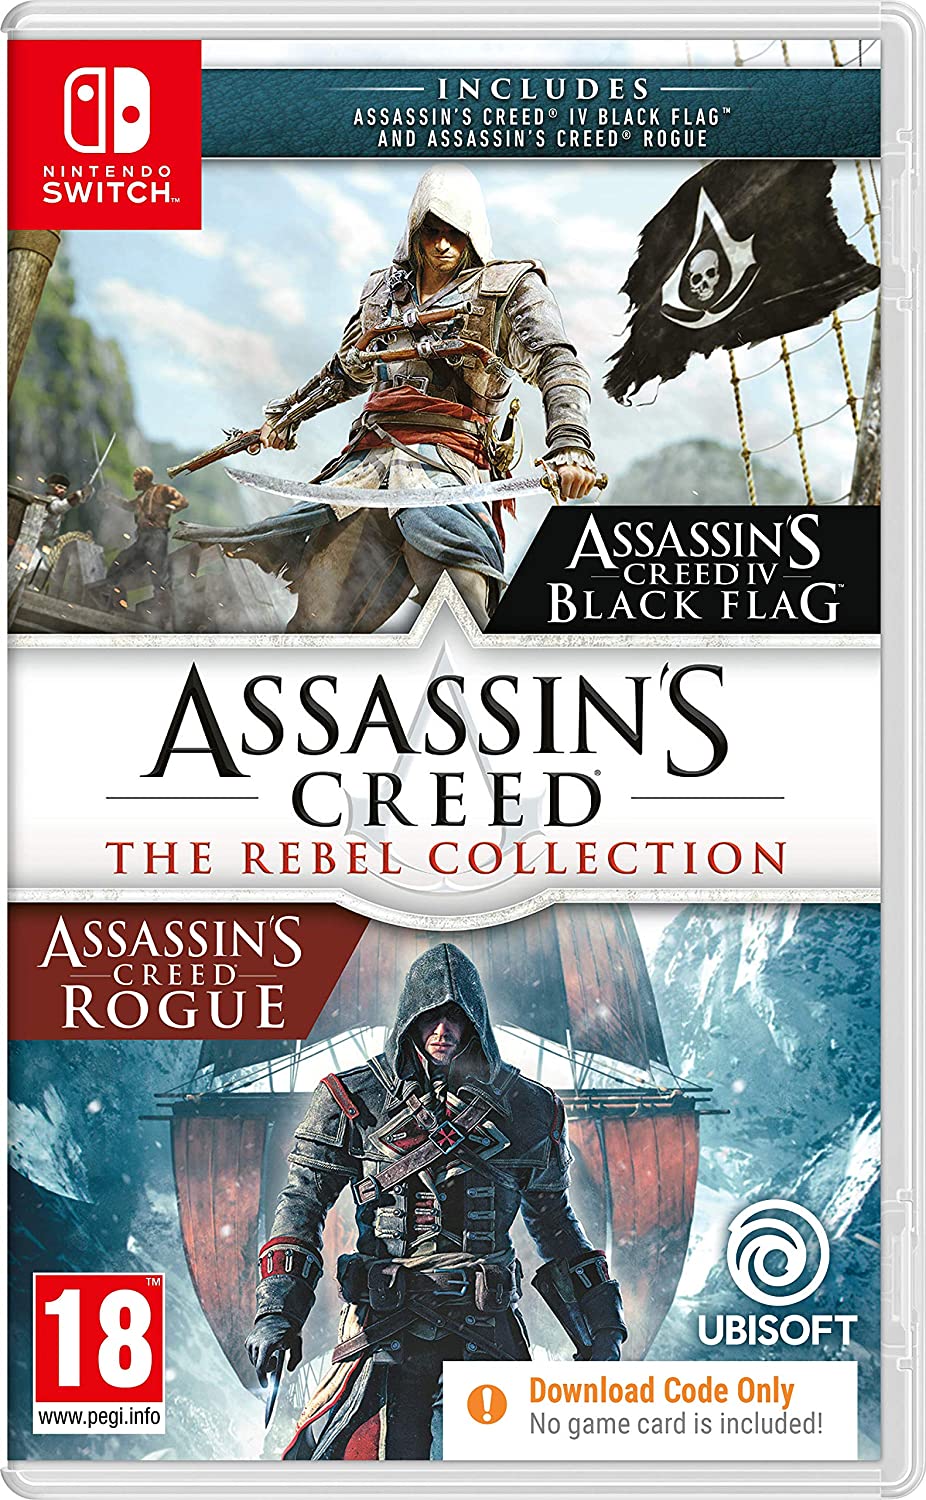 Assassin’s Creed: The Rebel Collection for Nintendo Switch.